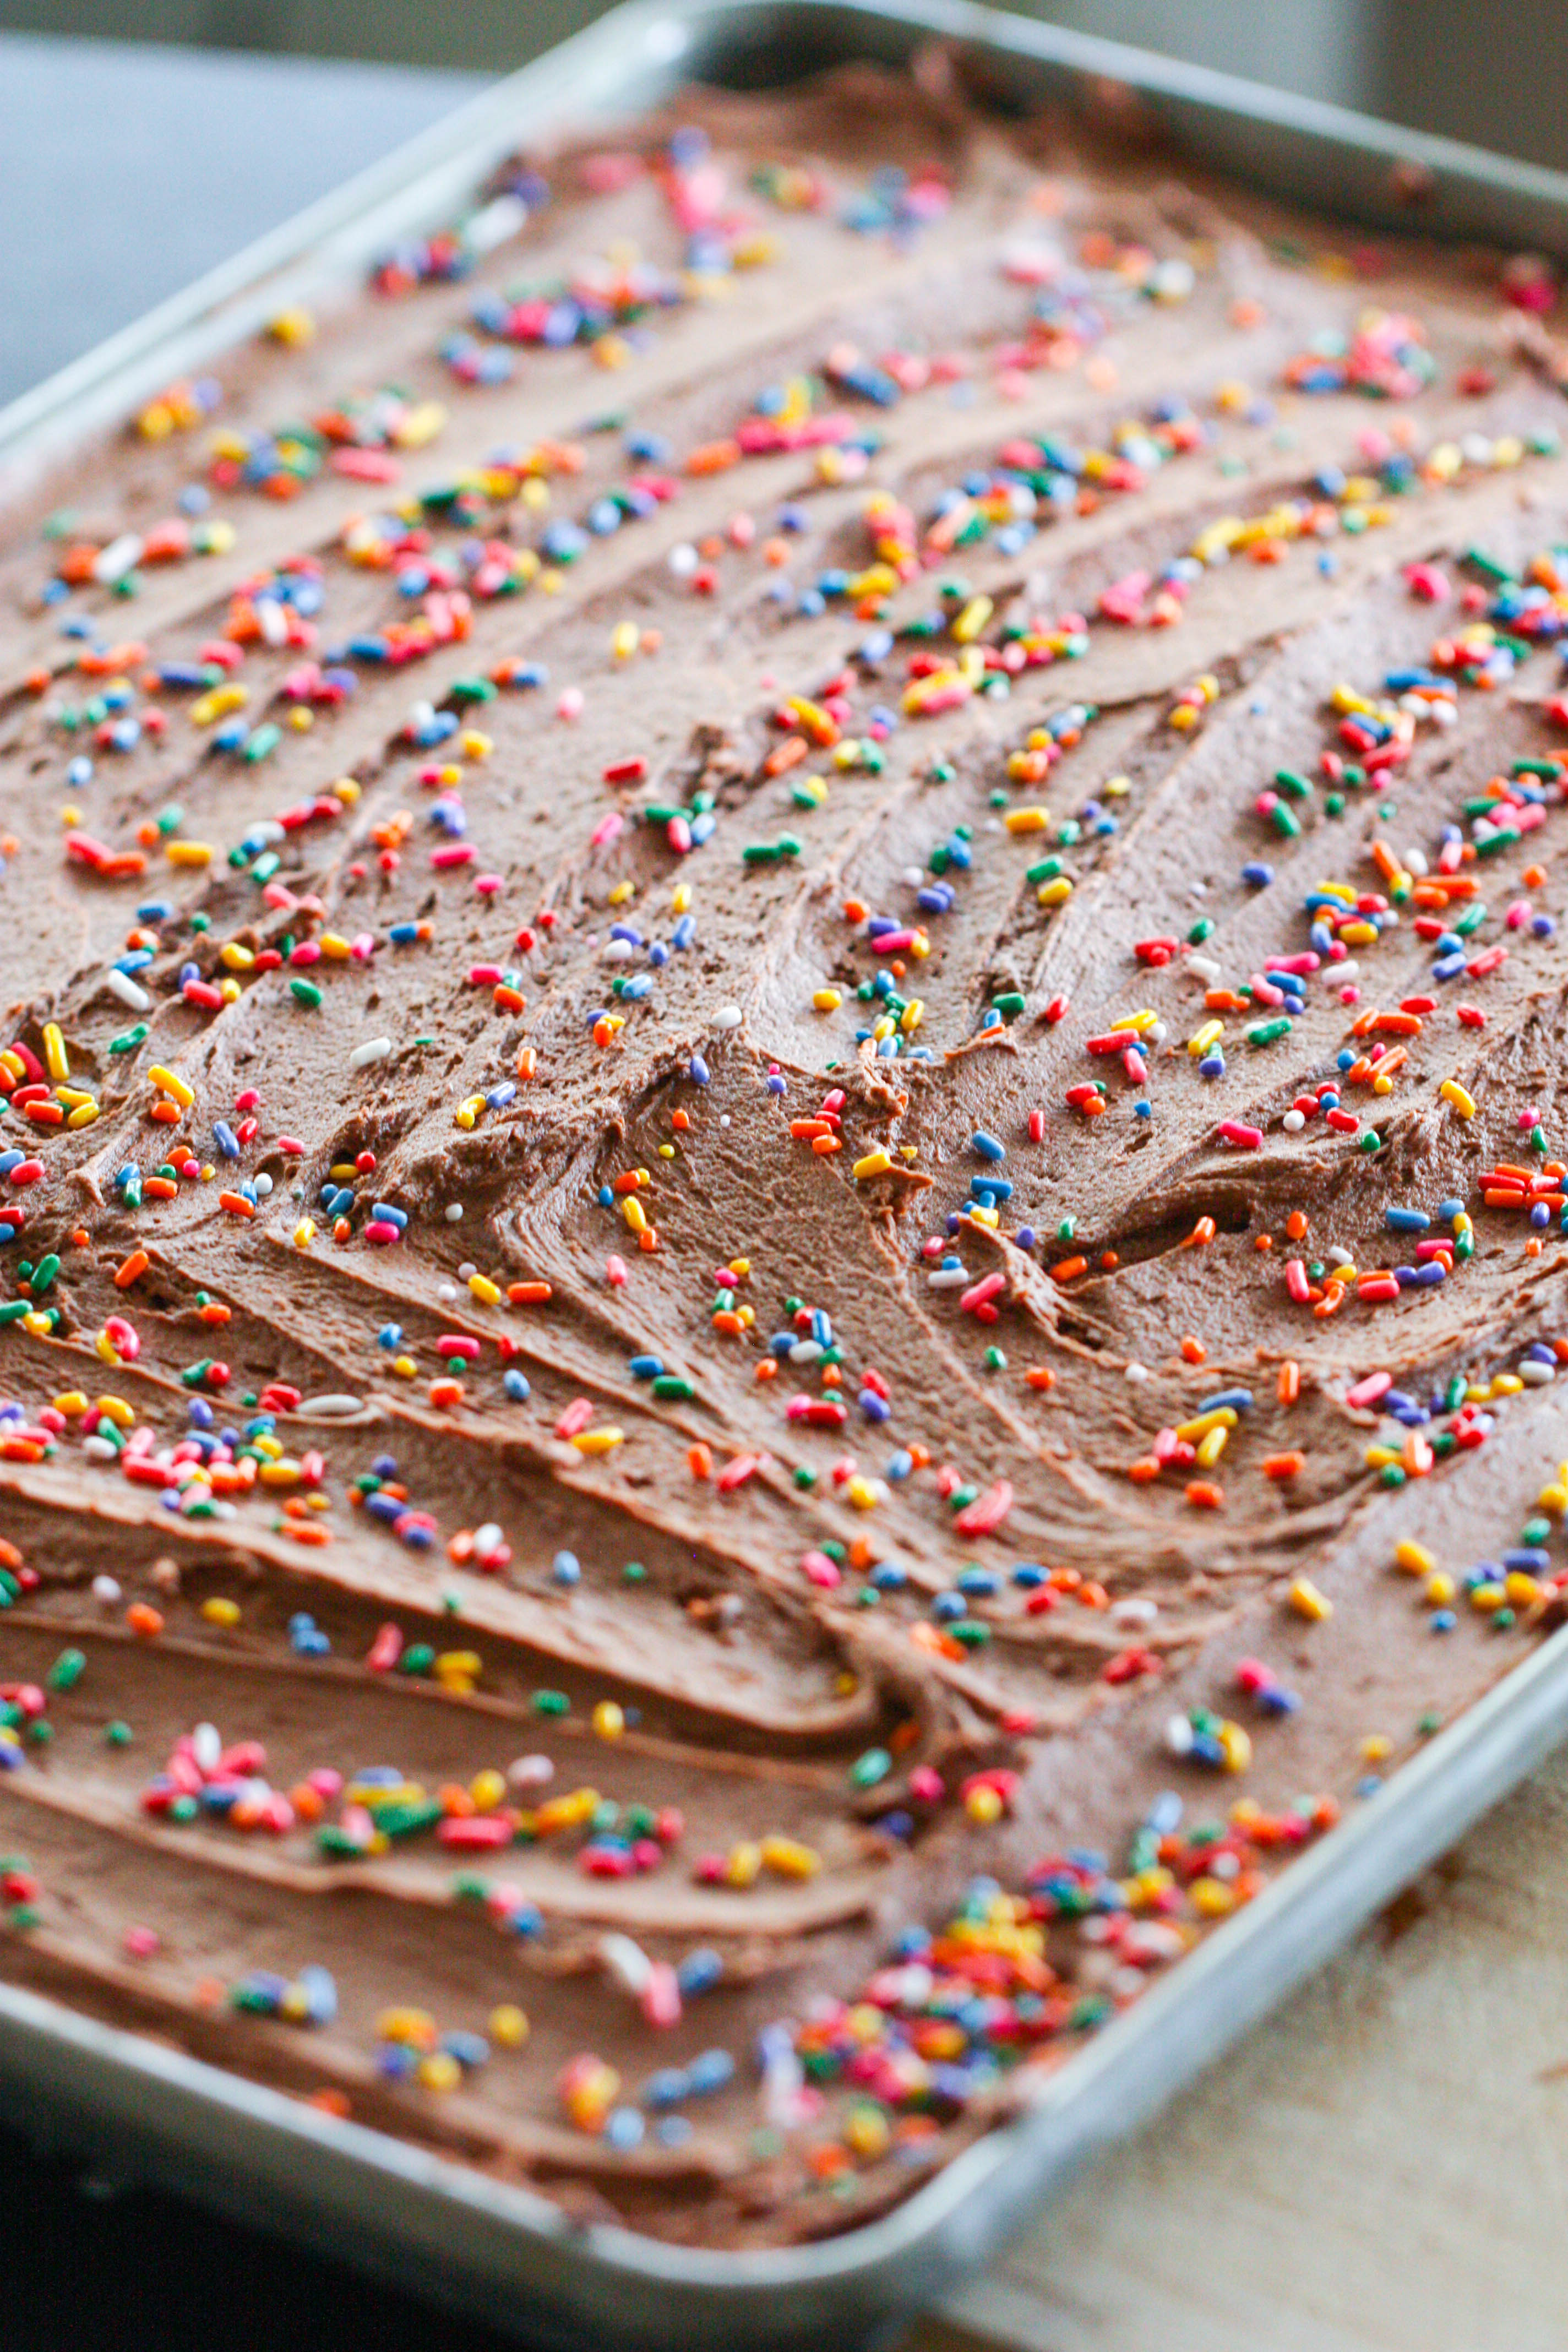 Sheet Pan of Chocolate Sugar Cookie Bars topped with sprinkles